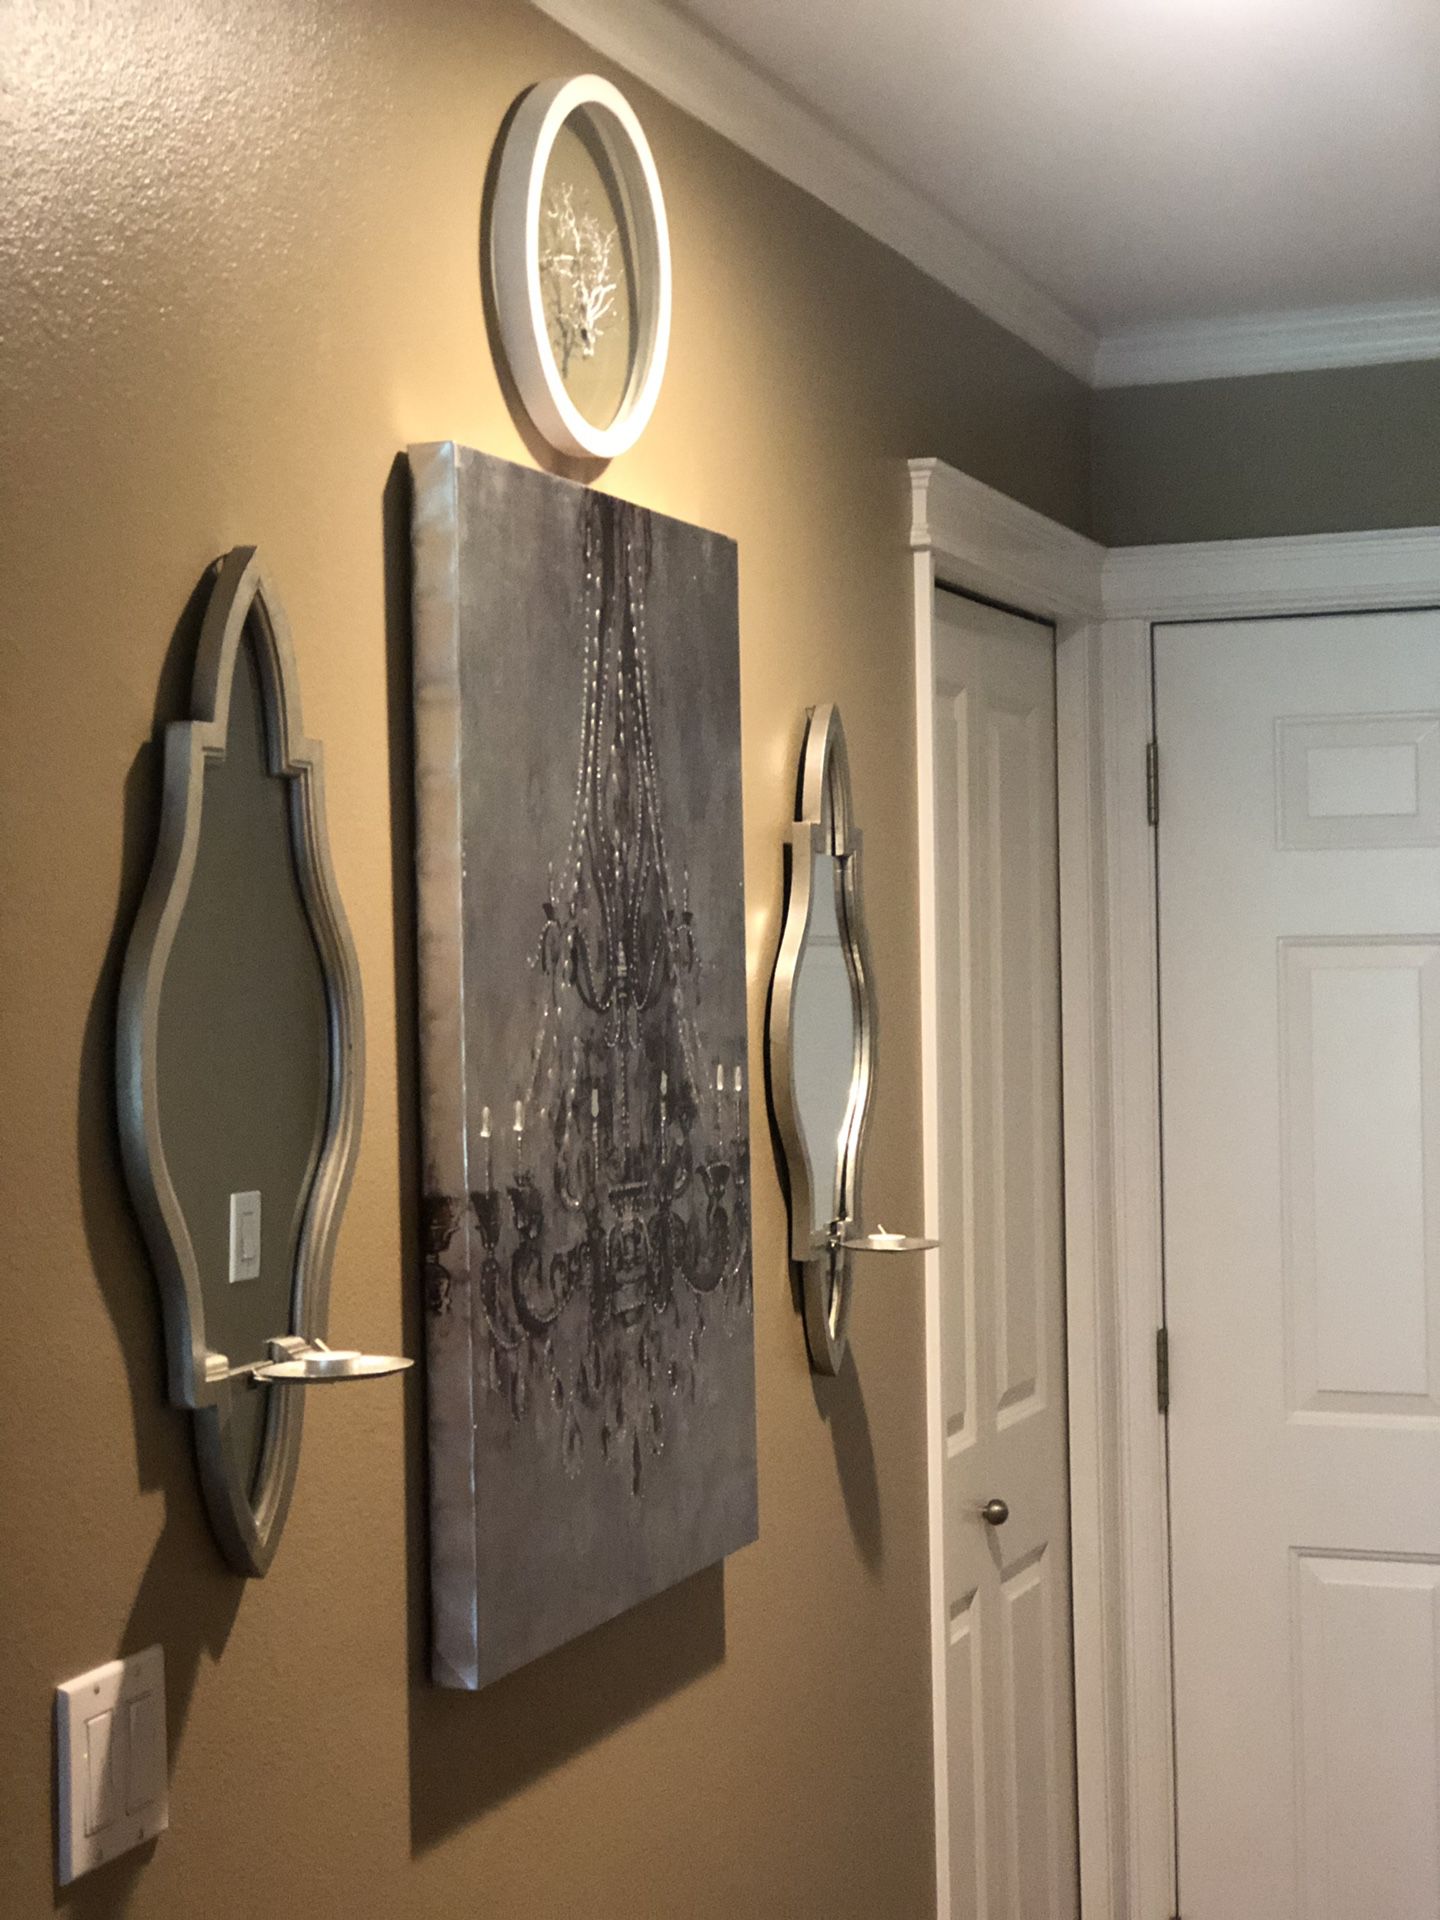 All wall art for sale today - MOVING SALE!